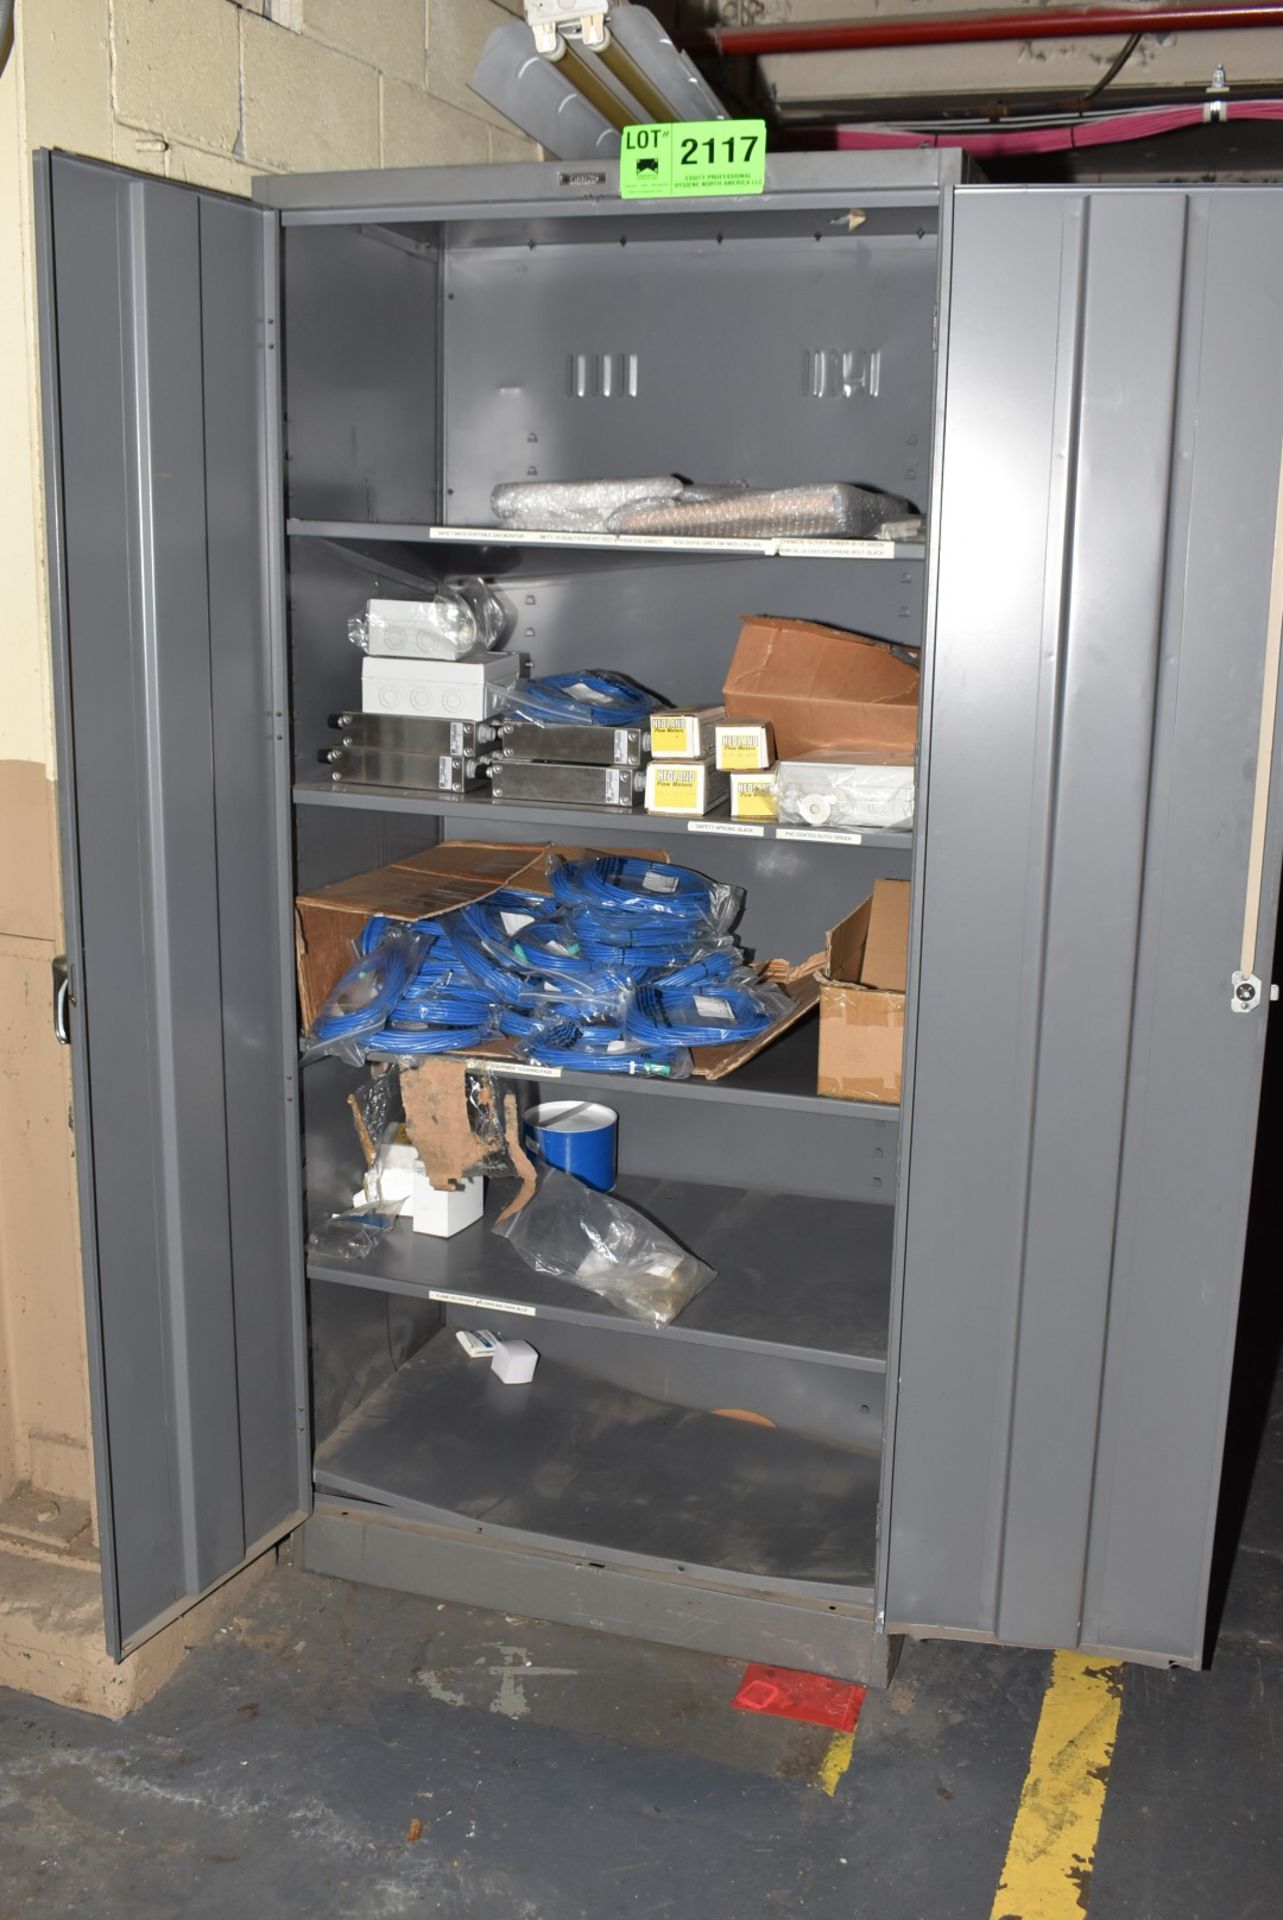 LOT/ HIGH BOY CABINET WITH CONTENTS CONSISTING OF CABLES AND PARTS [RIGGING FEES FOR LOT #2117 - $